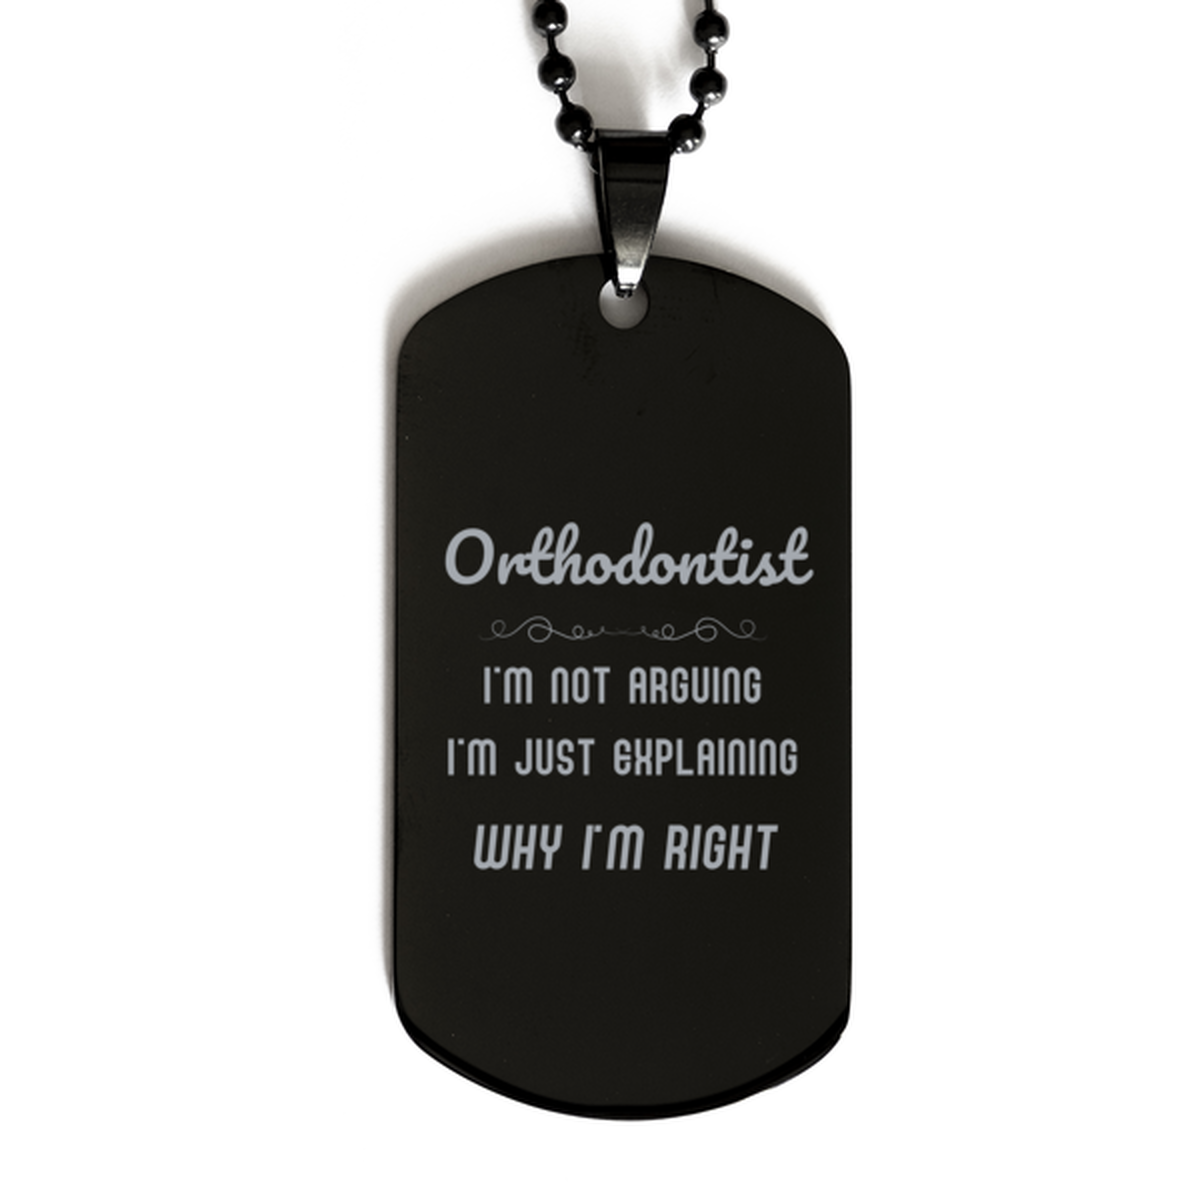 Orthodontist I'm not Arguing. I'm Just Explaining Why I'm RIGHT Black Dog Tag, Funny Saying Quote Orthodontist Gifts For Orthodontist Graduation Birthday Christmas Gifts for Men Women Coworker